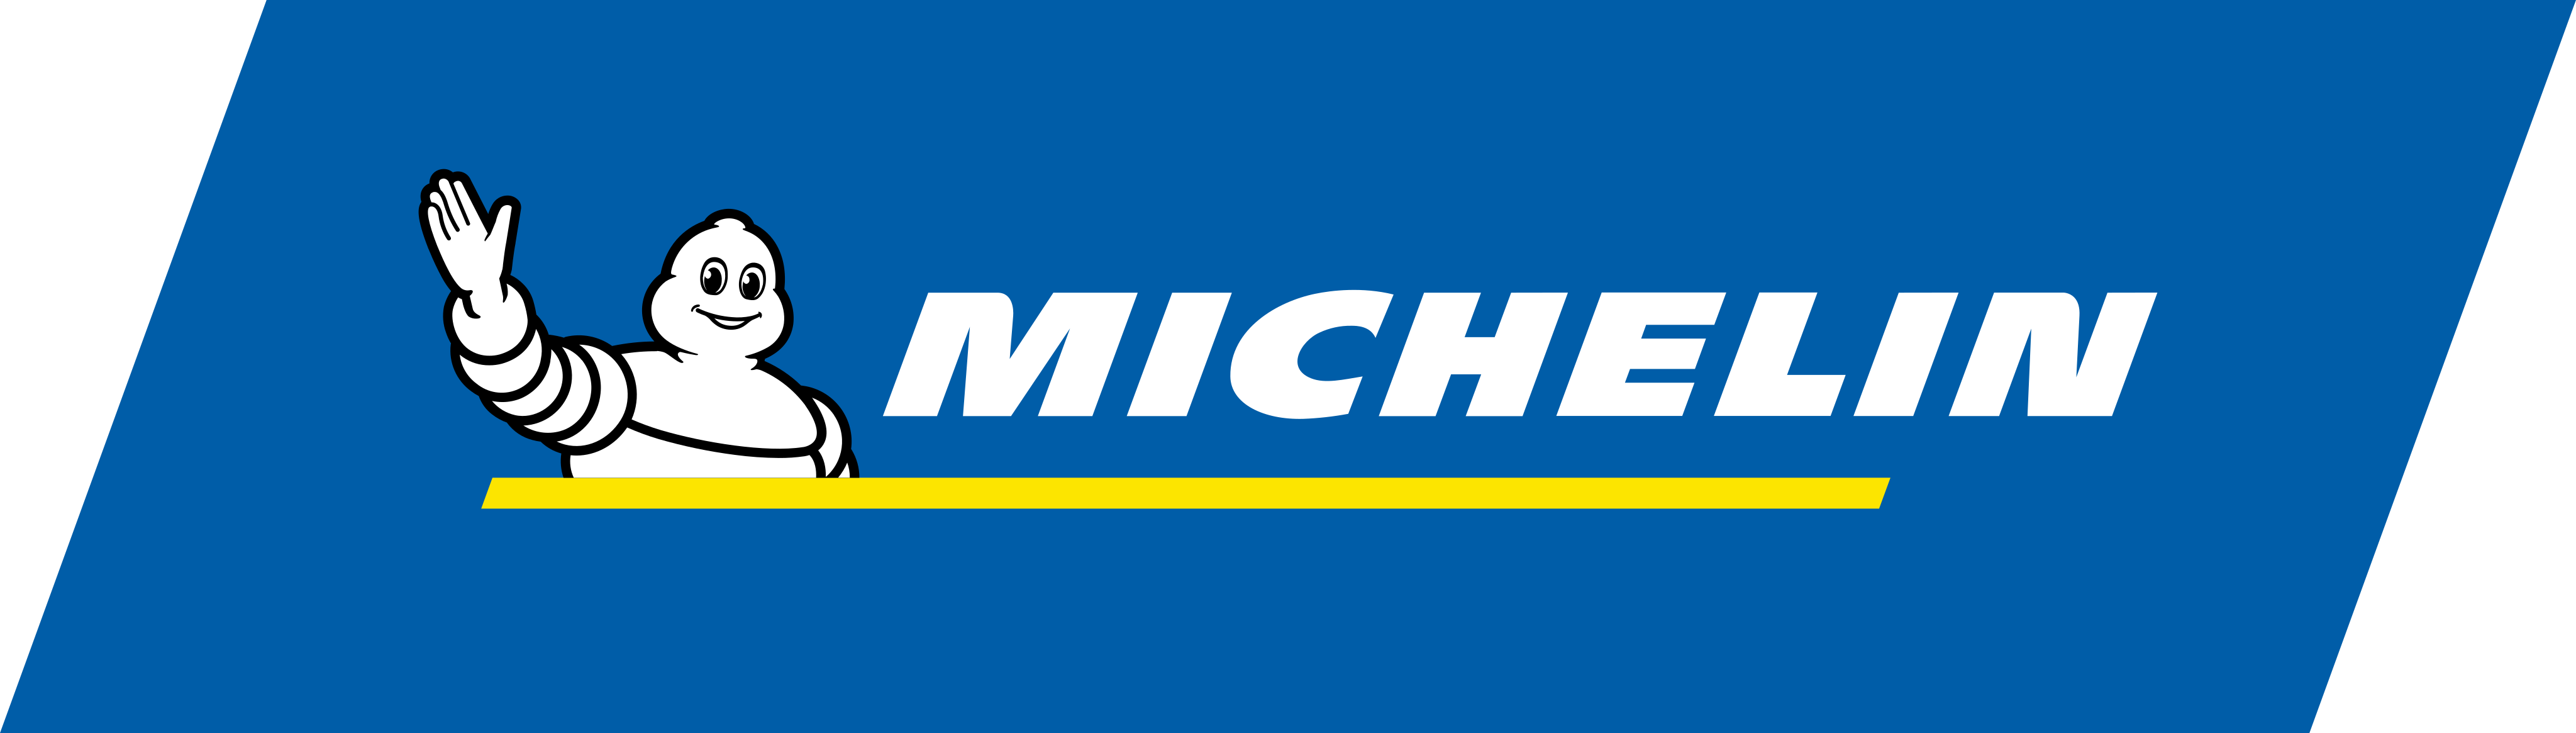 Michelin Logo   Png And Vector   Logo Download - Michelin, Transparent background PNG HD thumbnail